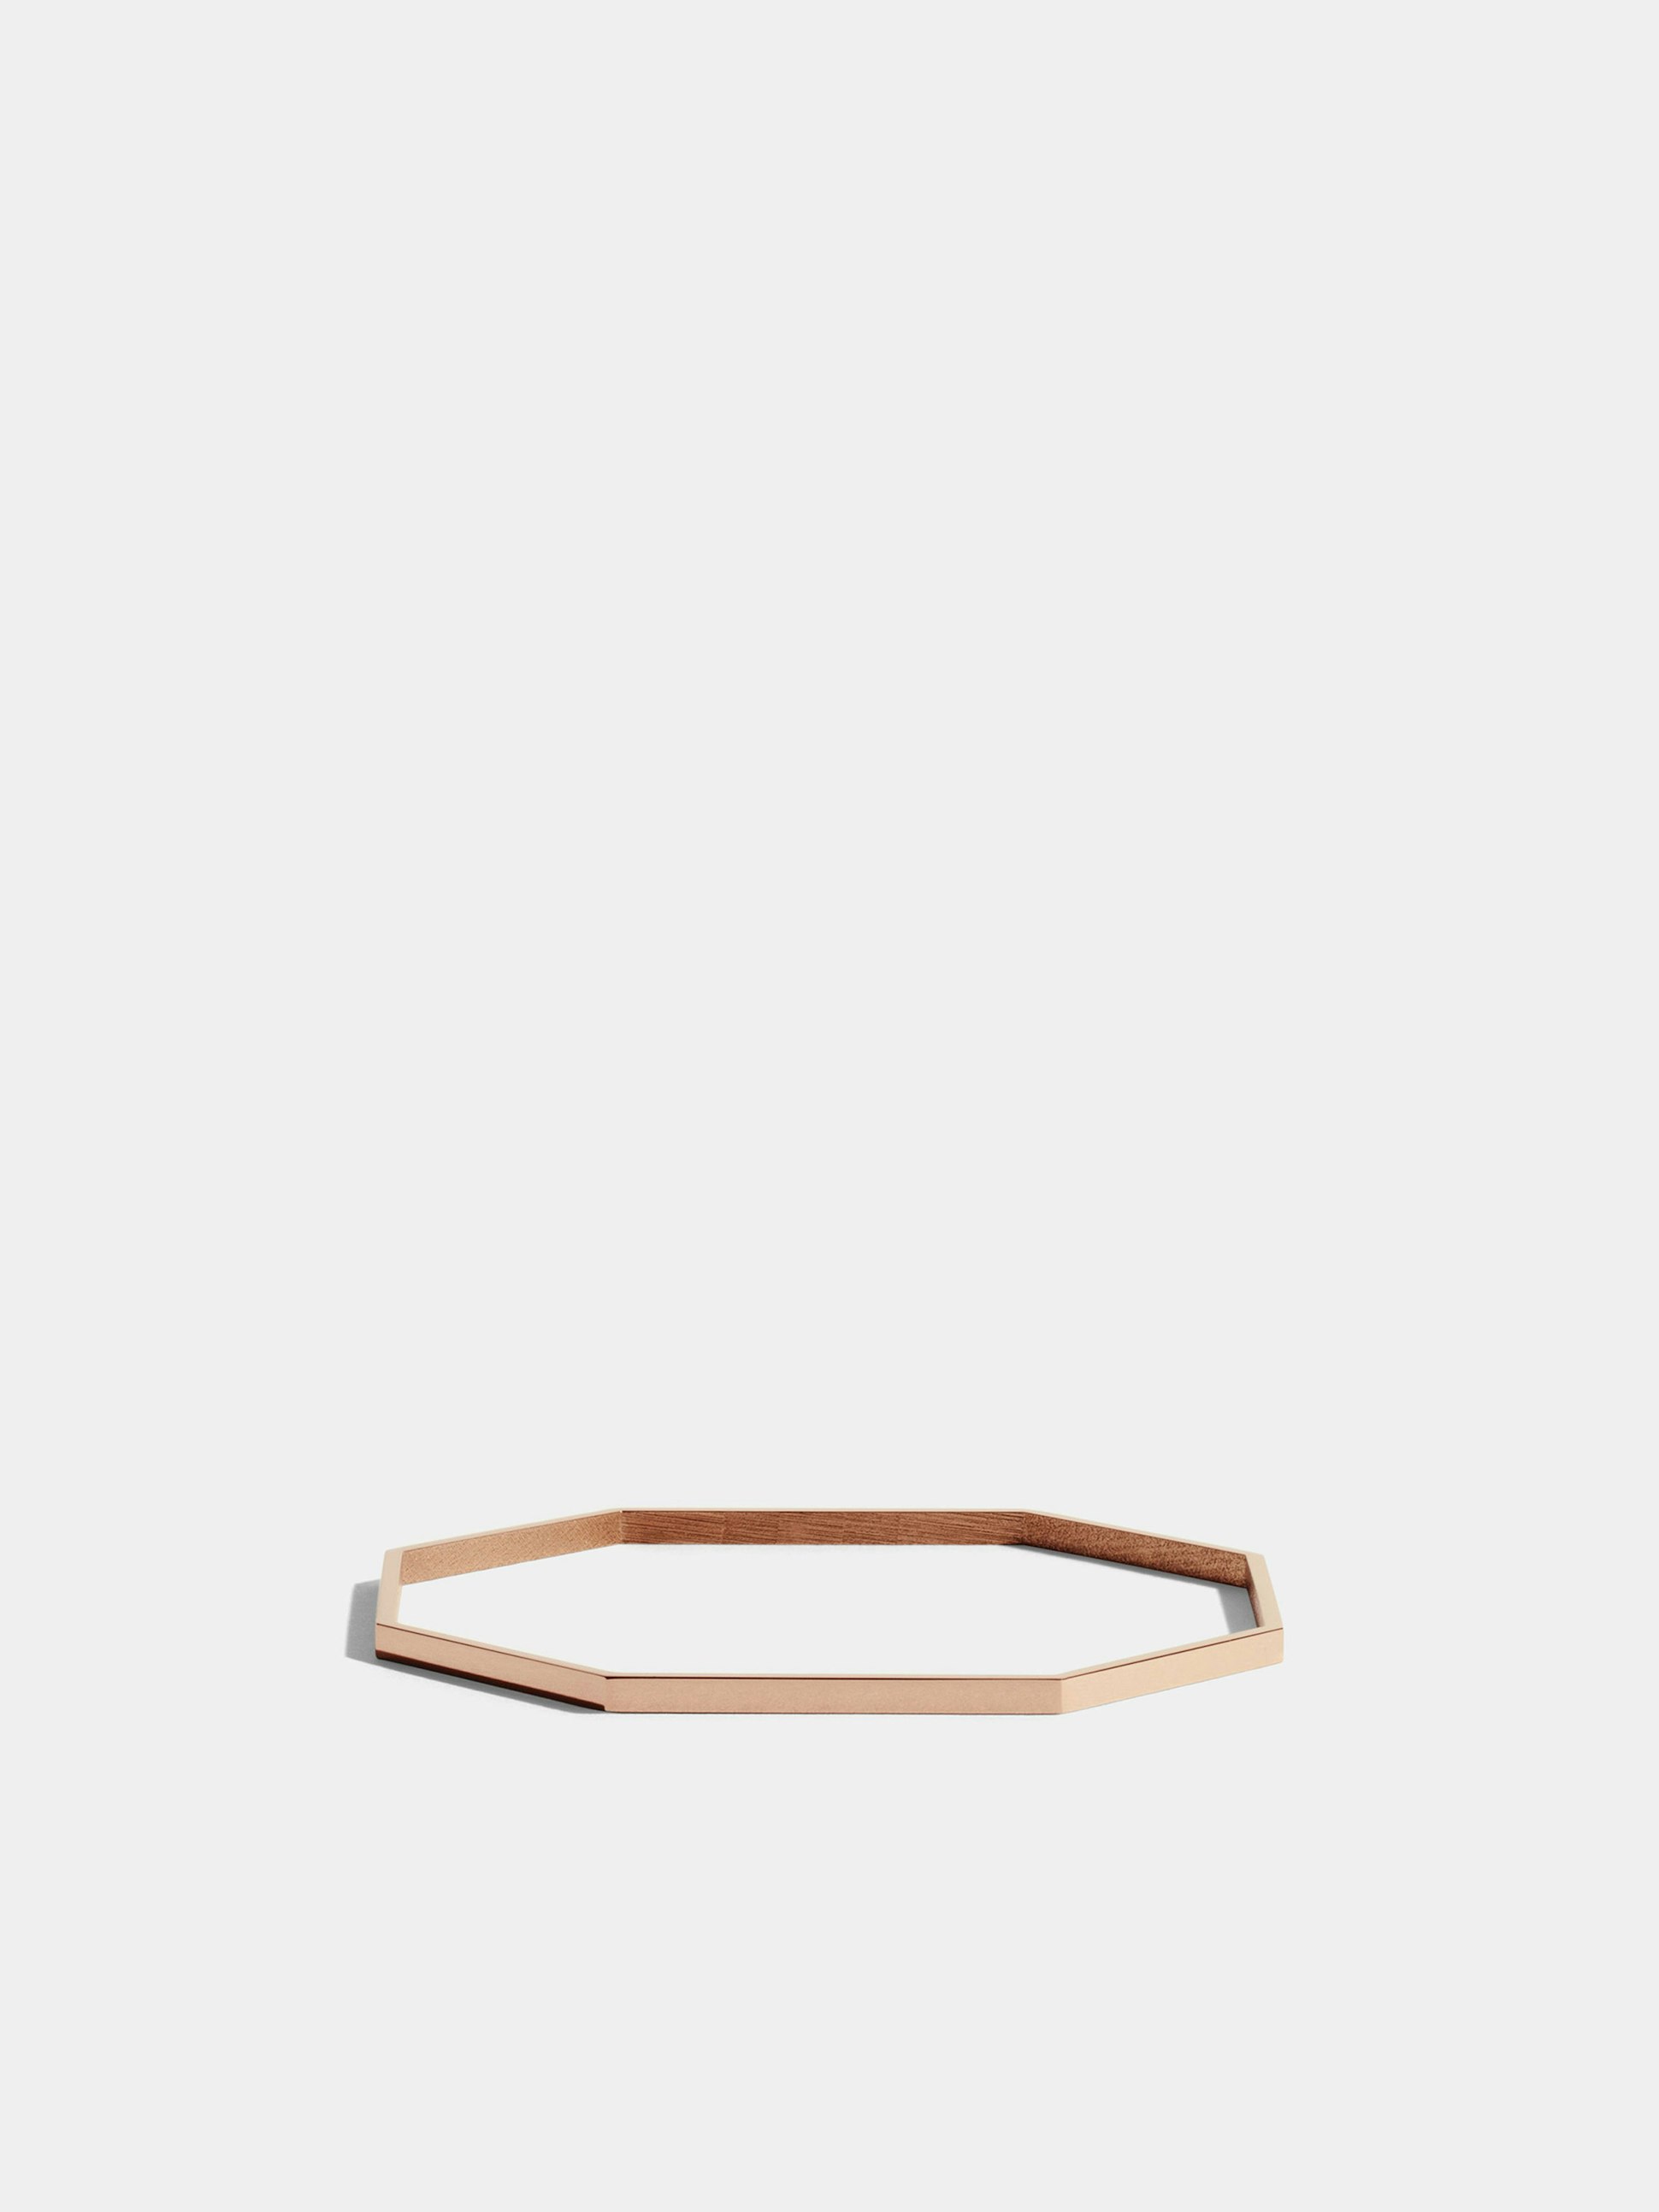 Octogone simple bangle in 18k Fairmined ethical rose gold